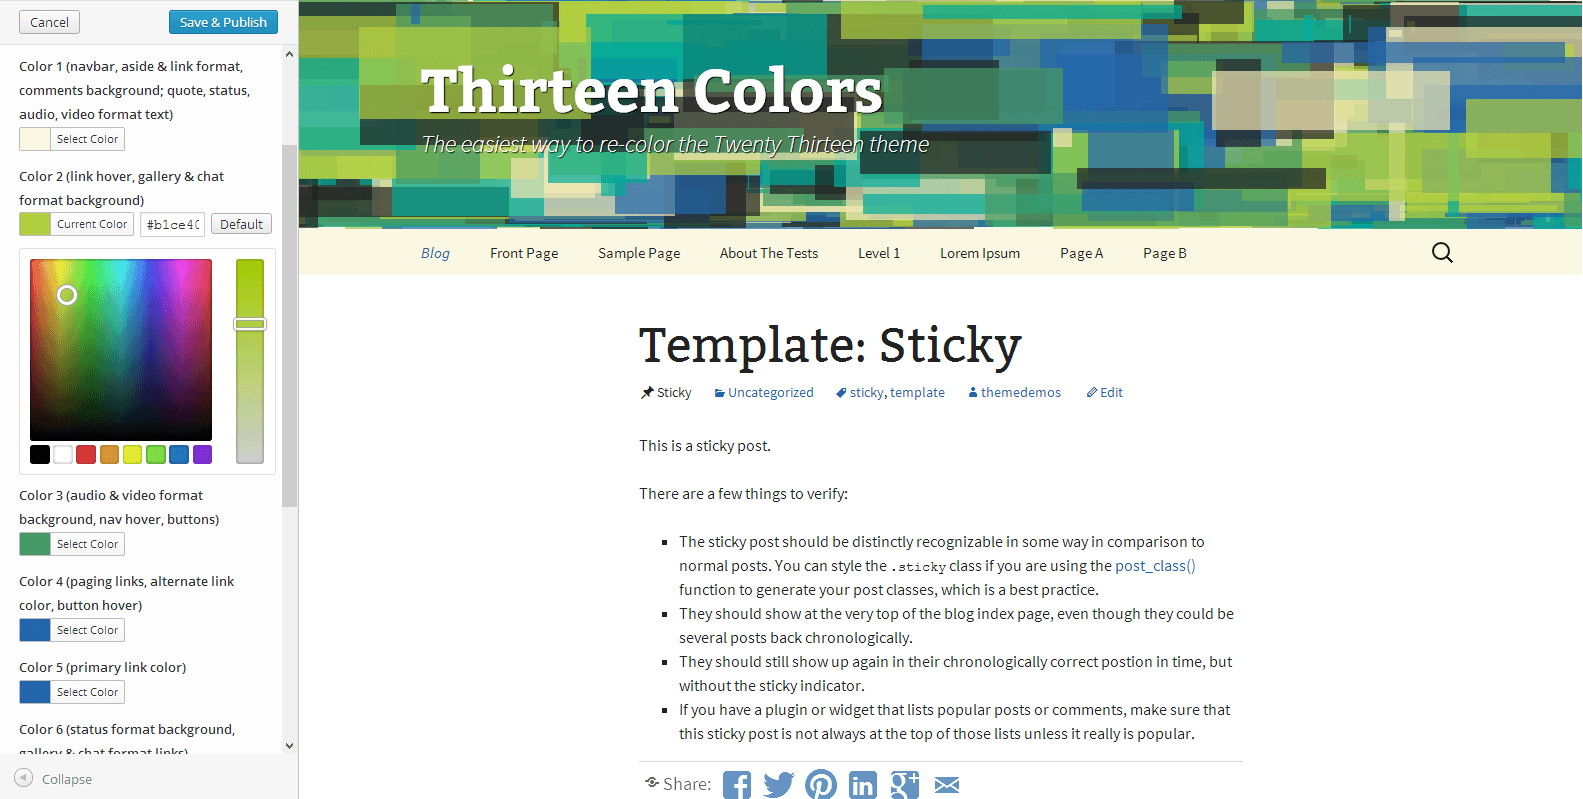 Color customization interface within the theme customizer.